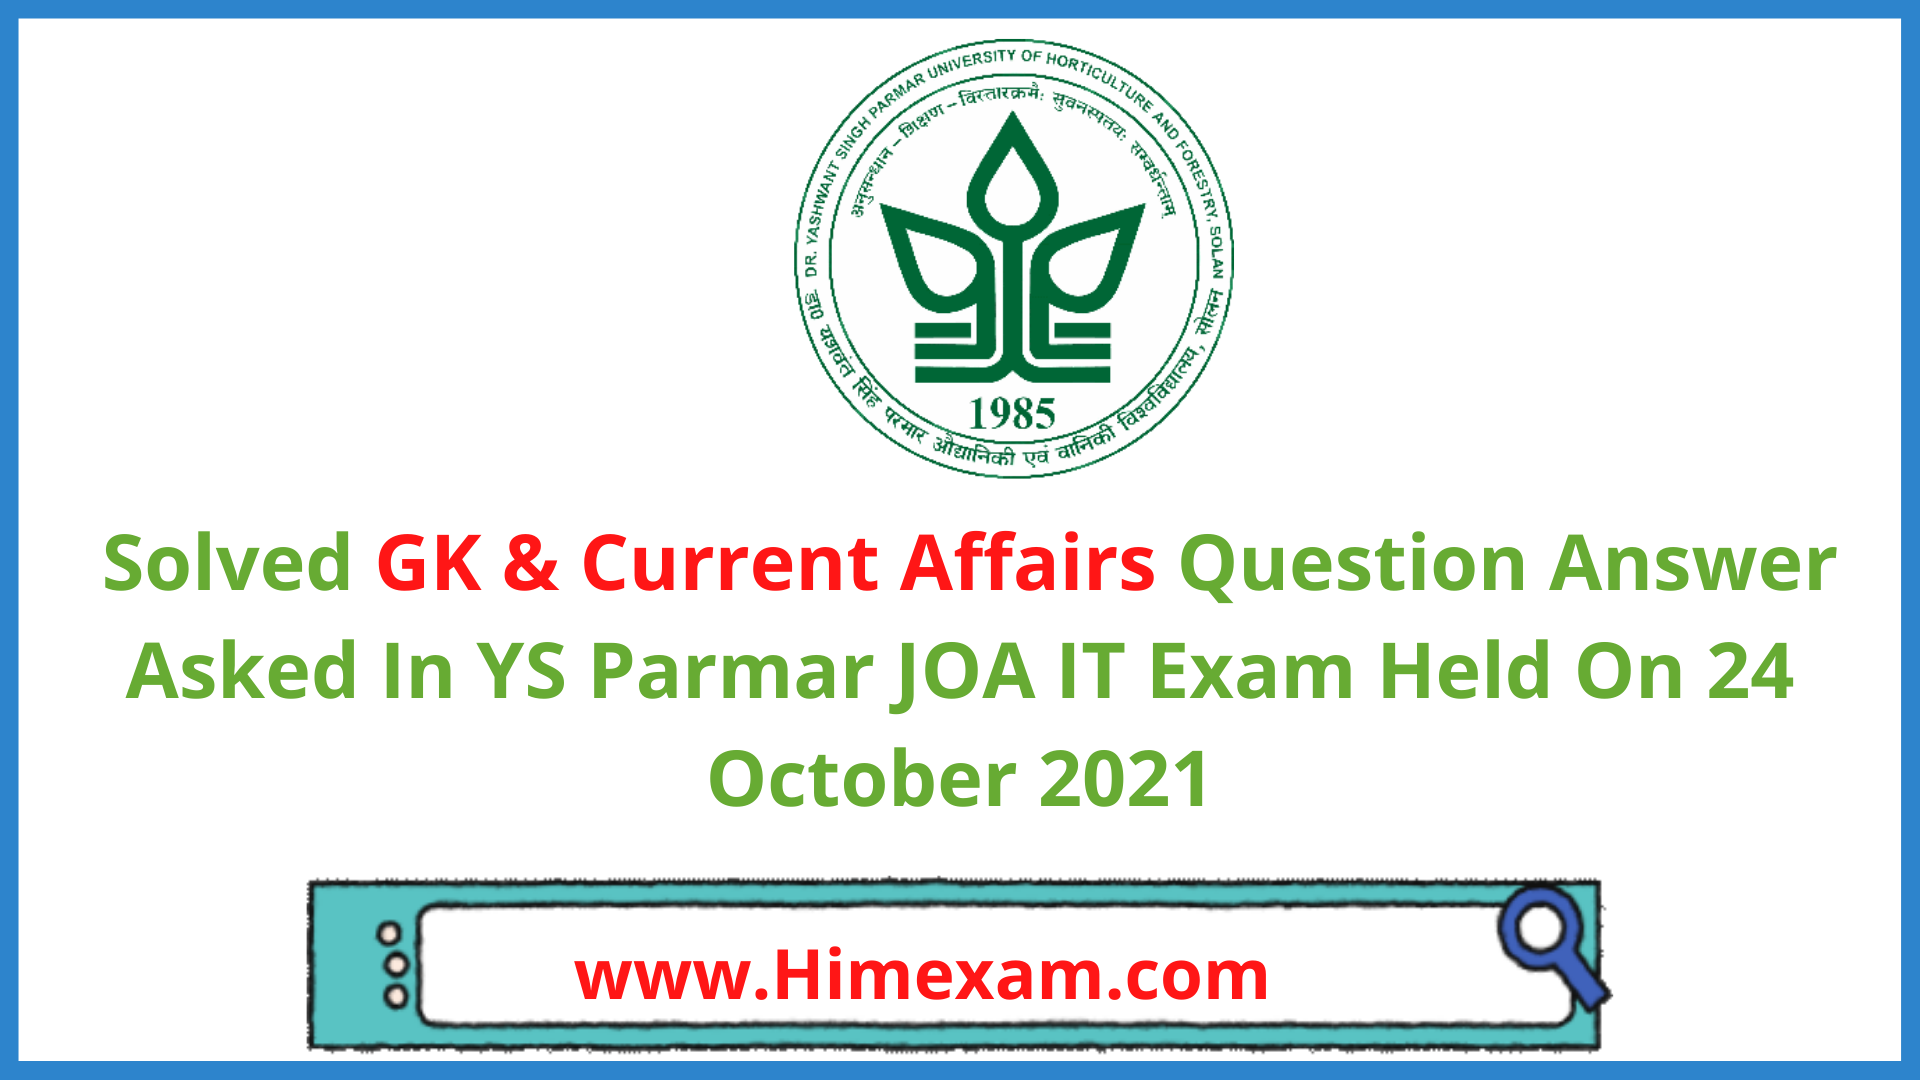 Solved GK & Current Affairs Question Answer Asked In YS Parmar JOA IT Exam Held On 24 October 2021